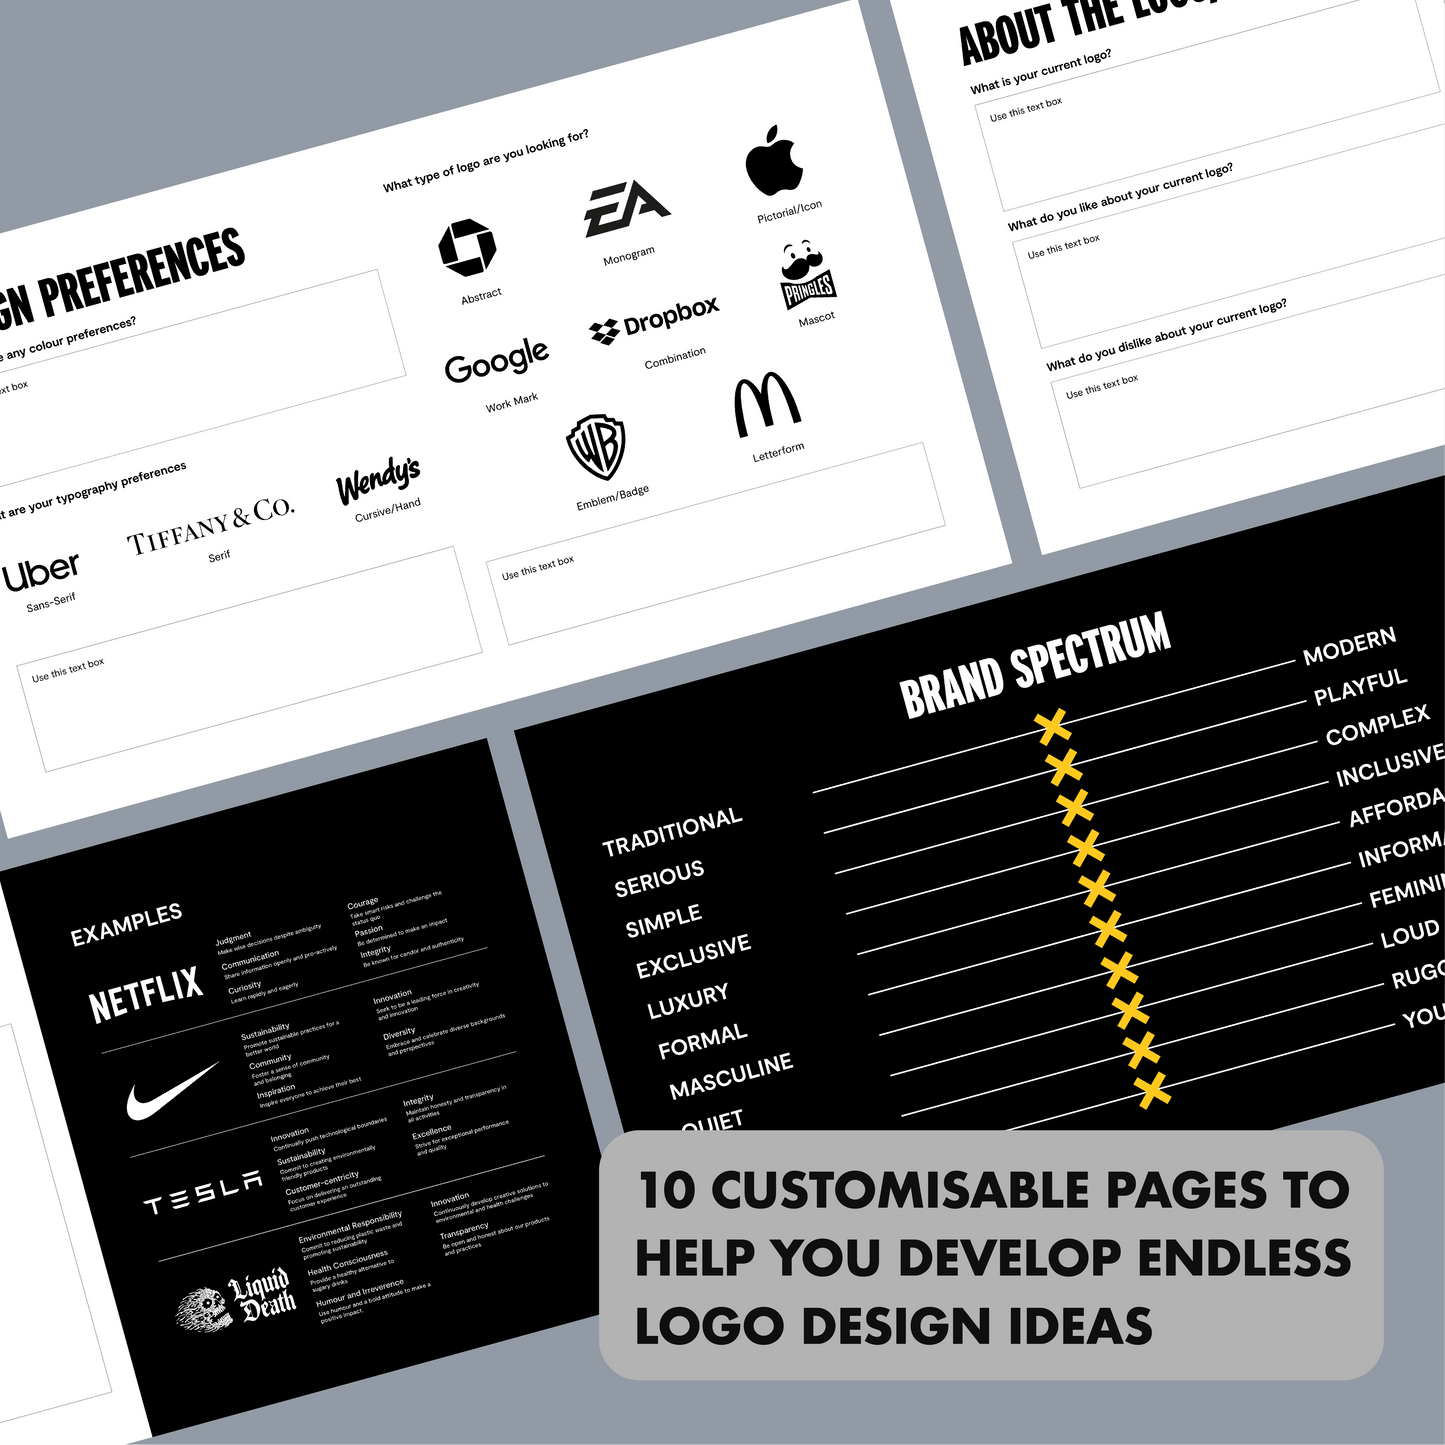 THE VISUAL IDENTITY CLIENT WORKBOOK TEMPLATE